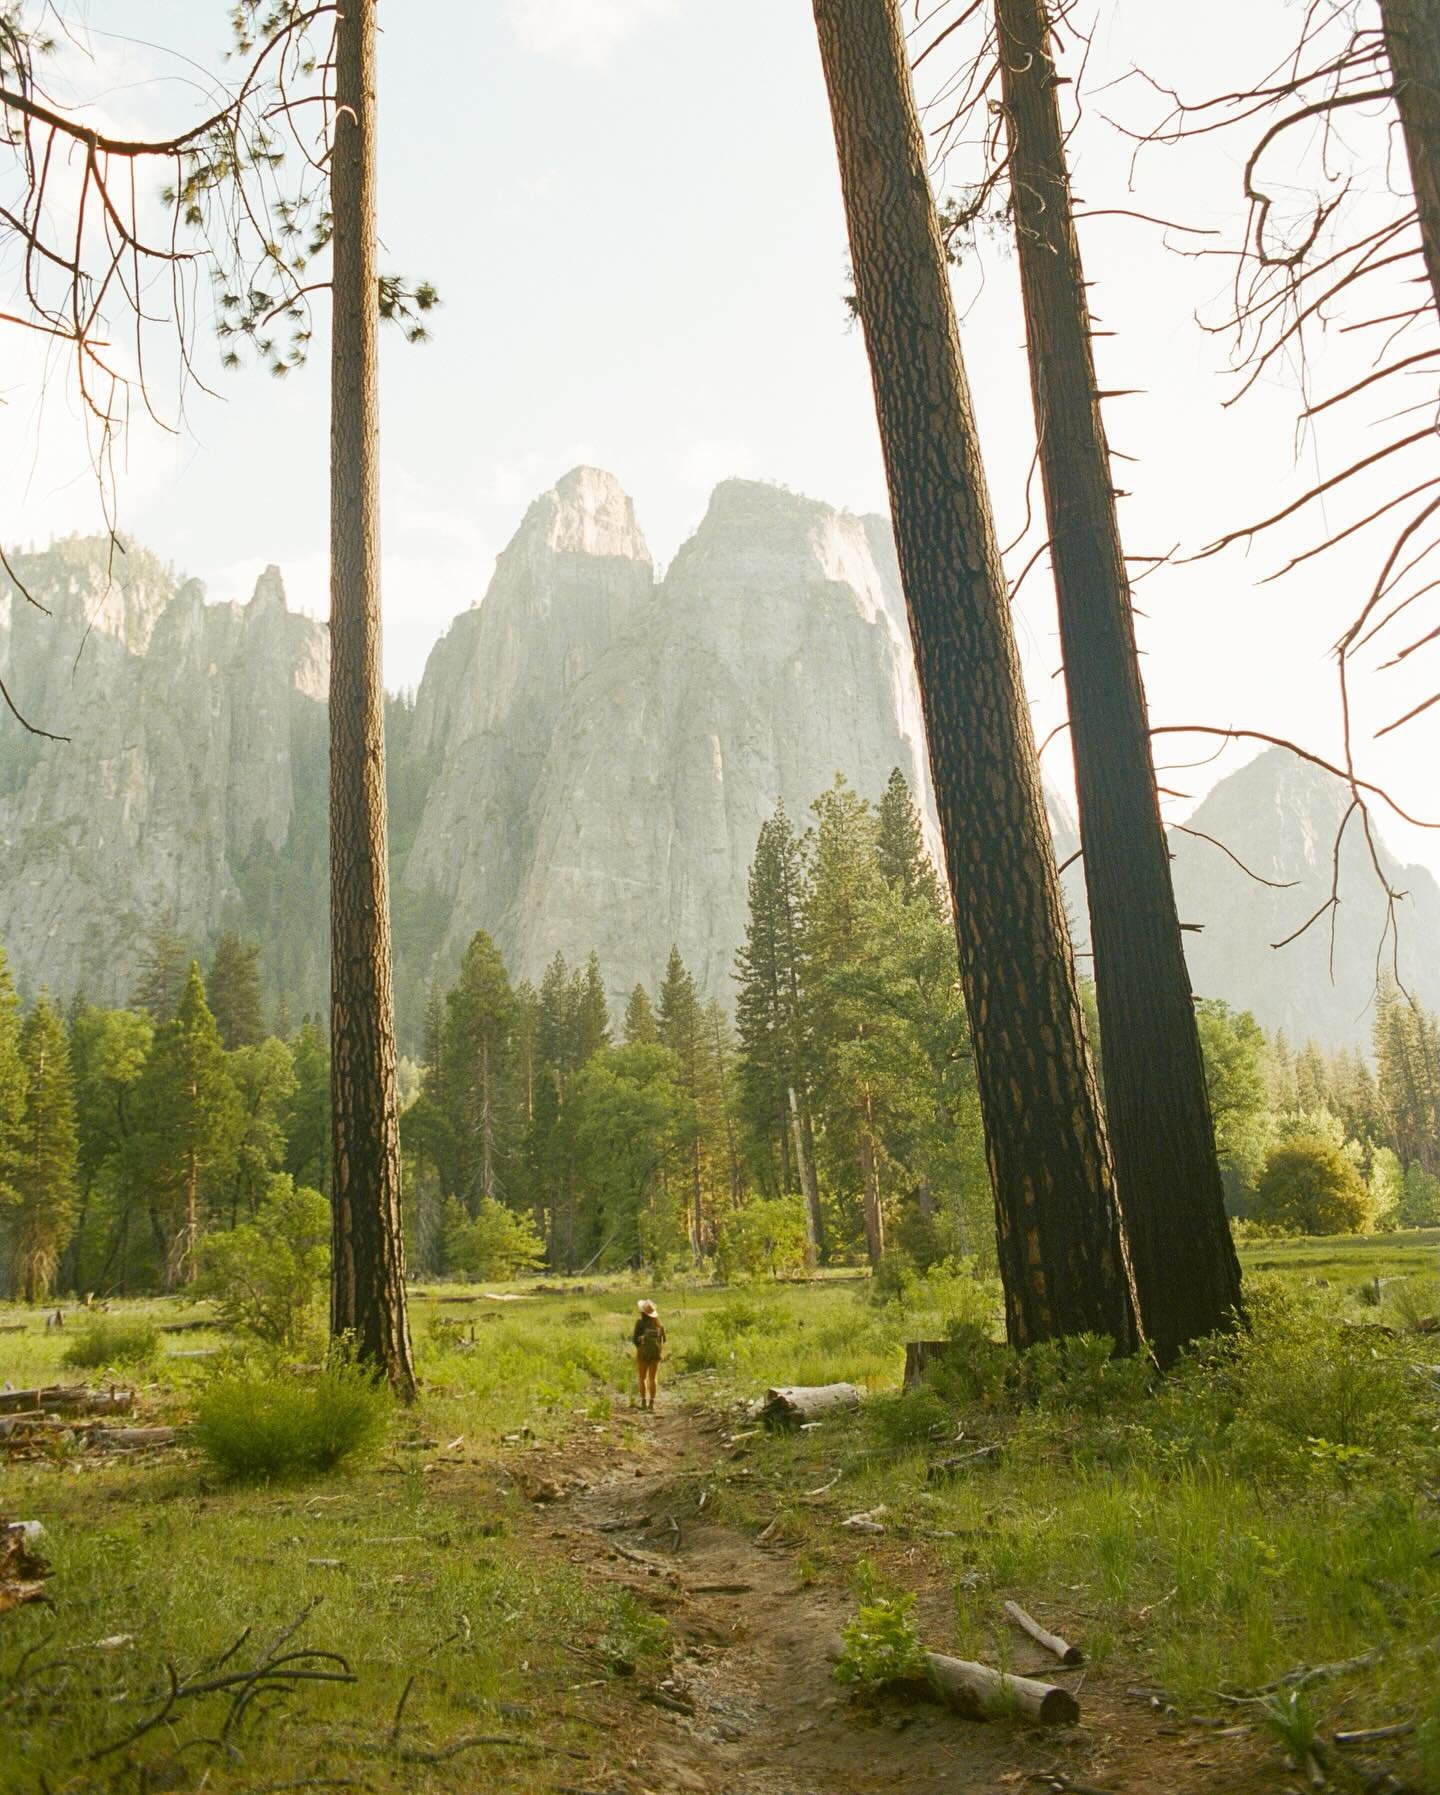 last spring in yosemite valley 🌿 #35mm 

first and last photos by @nathanielfilm